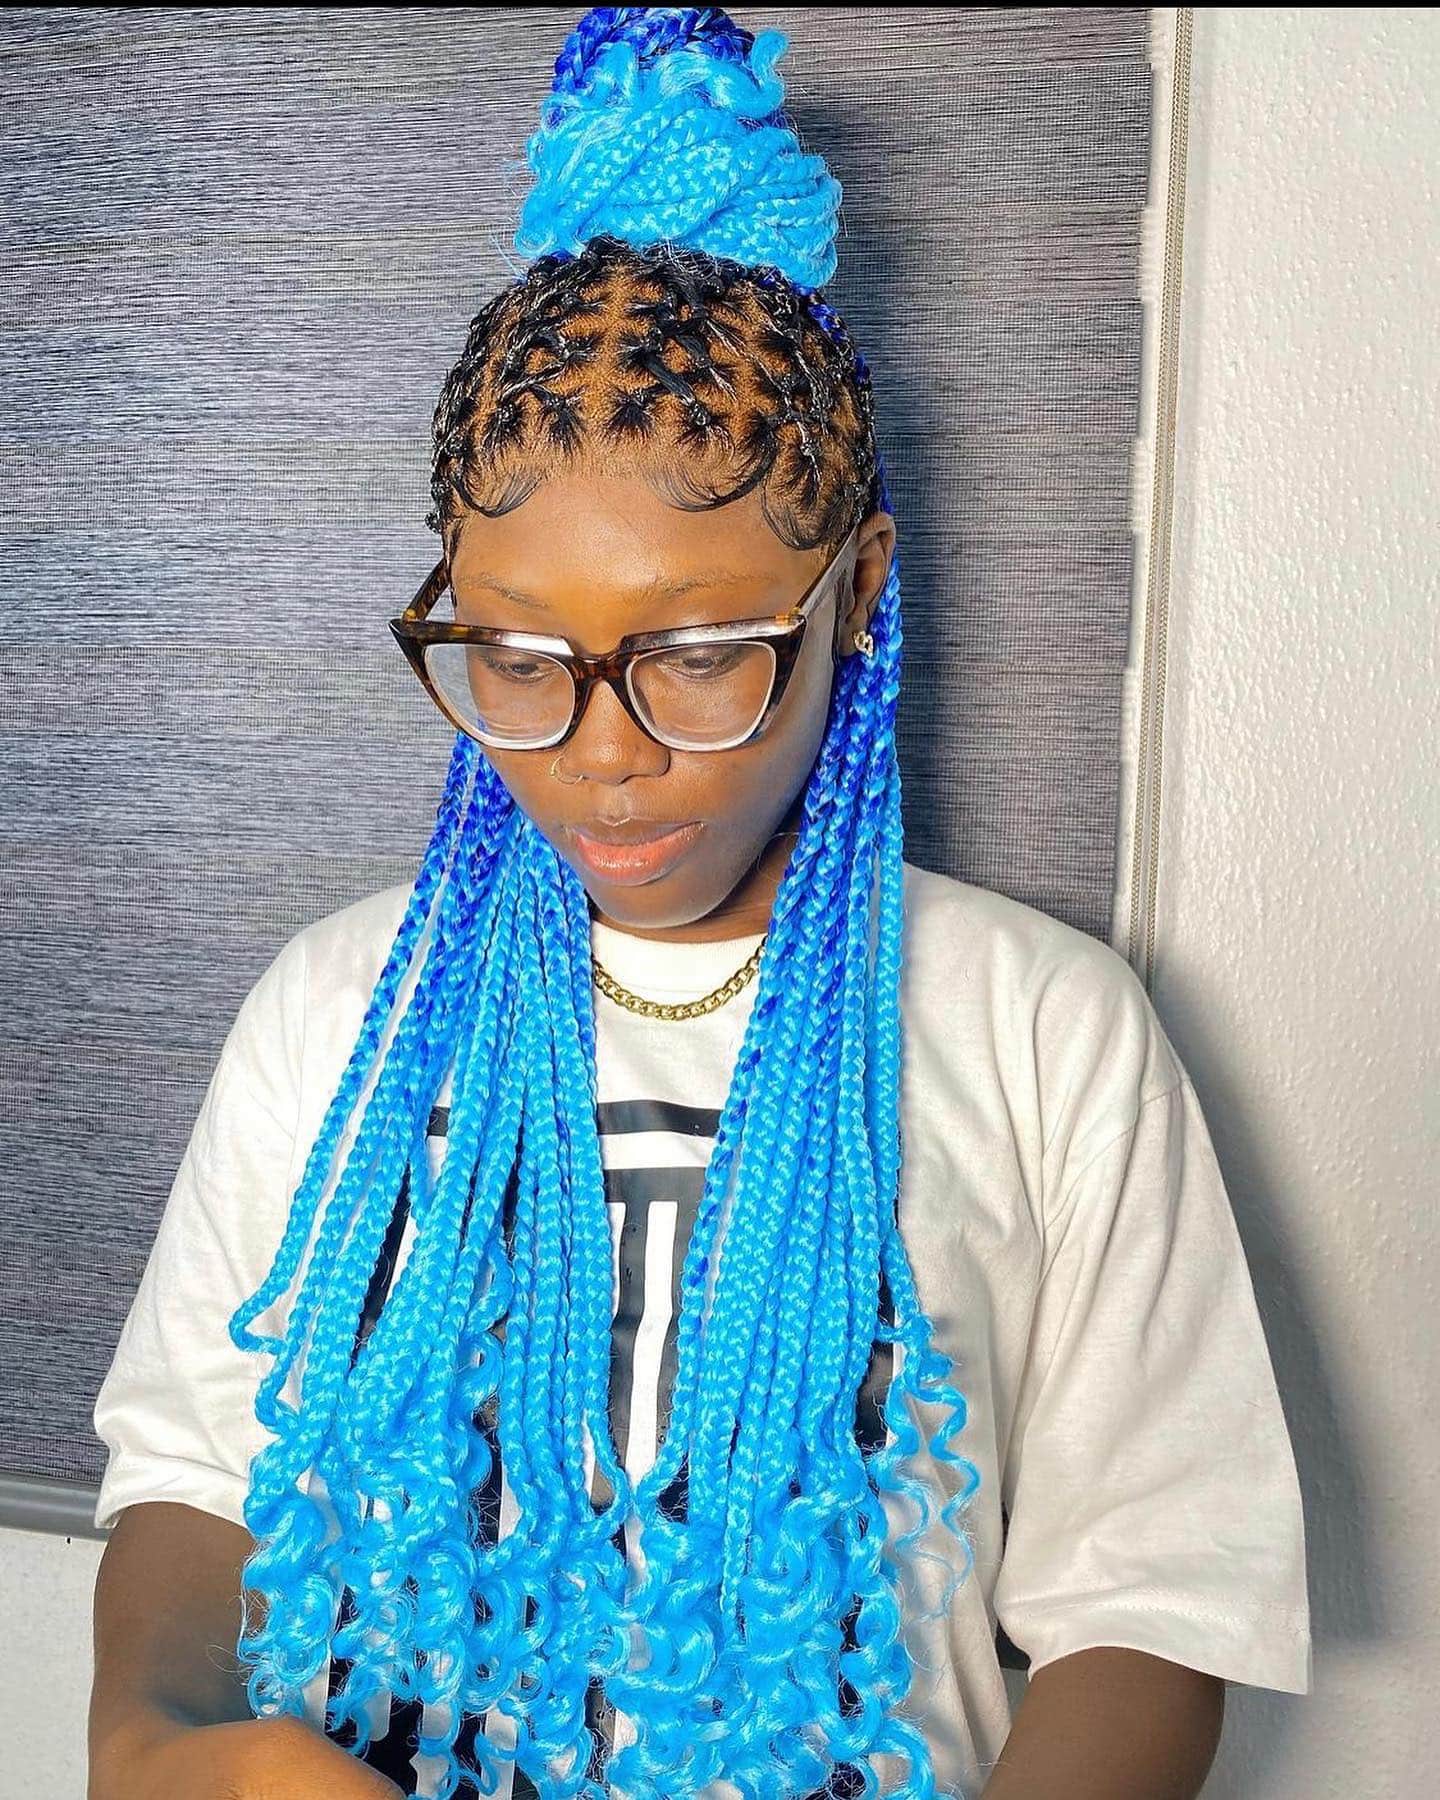 Image of Blue Box Braids With Curls in the style of Braids With Curls